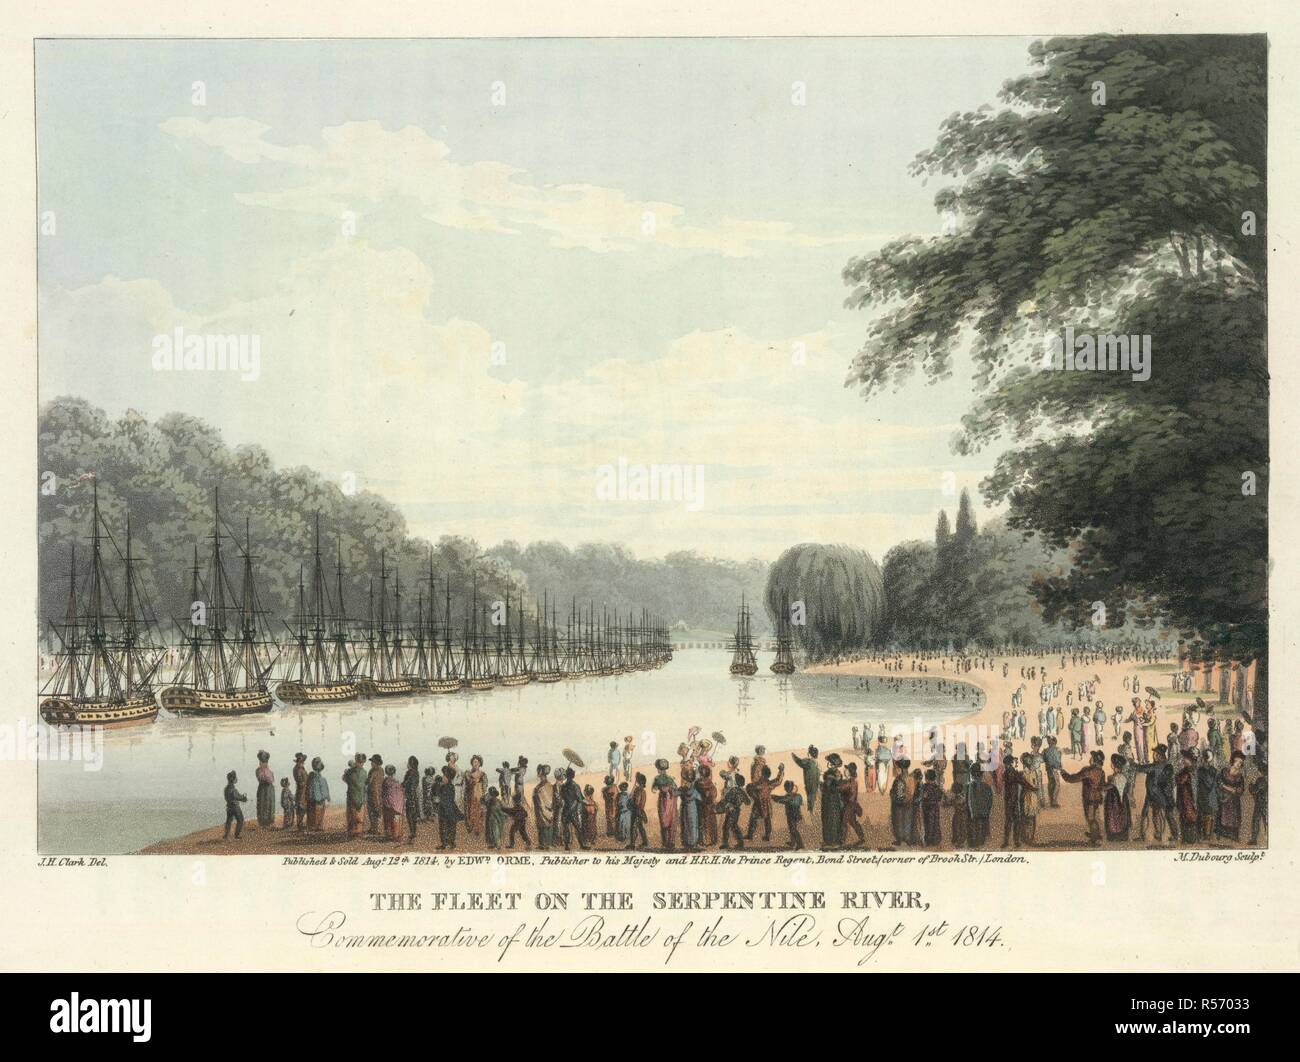 The Serpentine, Hyde Park. An Historical Memento, representing the different. Edward Orme: London, 1814. The fleet on the Serpentine river, commemorative of the Battle of the Nile, Aust. 1st, 1814'. A mock naval battle between the English and French fleet (under American colours).  Image taken from An Historical Memento, representing the different scenes of public rejoicing, which took place the first of August, in St. James's and Hyde Parks, London, in celebration of the Glorious Peace of 1814, and of the centenary of the accession of the illustrious House of Brunswick, etc. (Edited by Edward Stock Photo